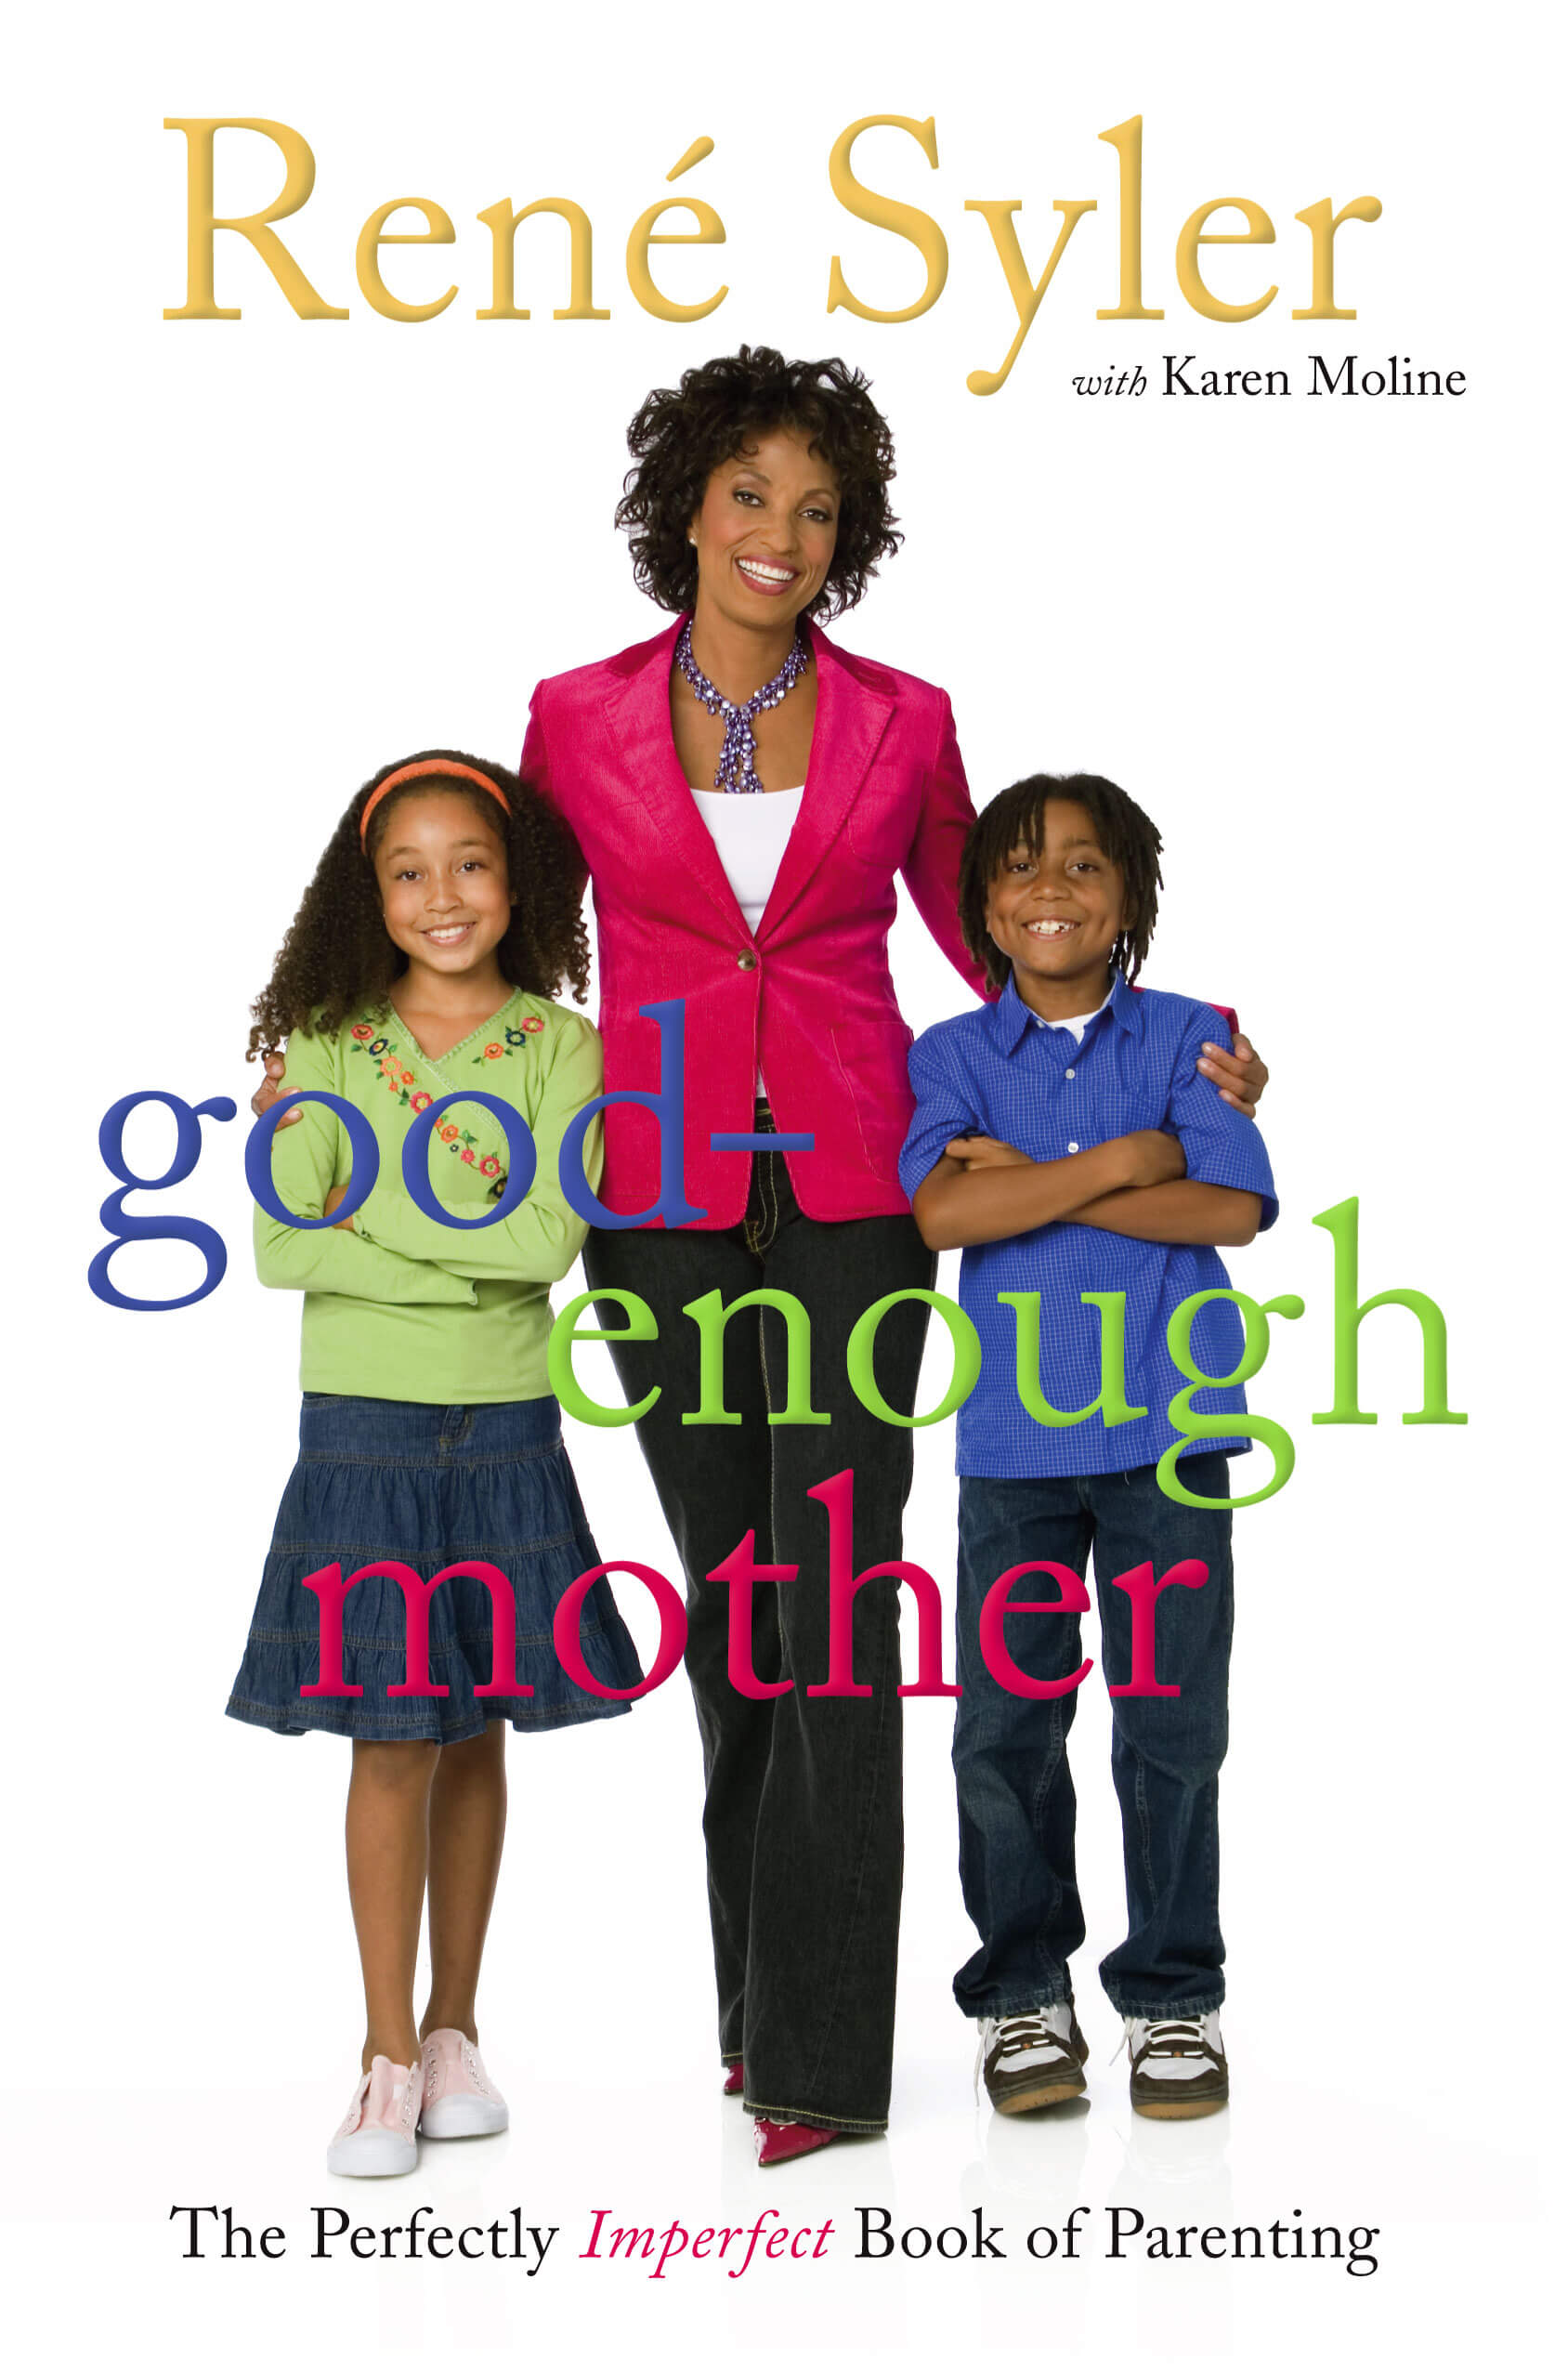 SPECIAL OFFER: GET A SIGNED COPY OF GOOD ENOUGH MOTHER!